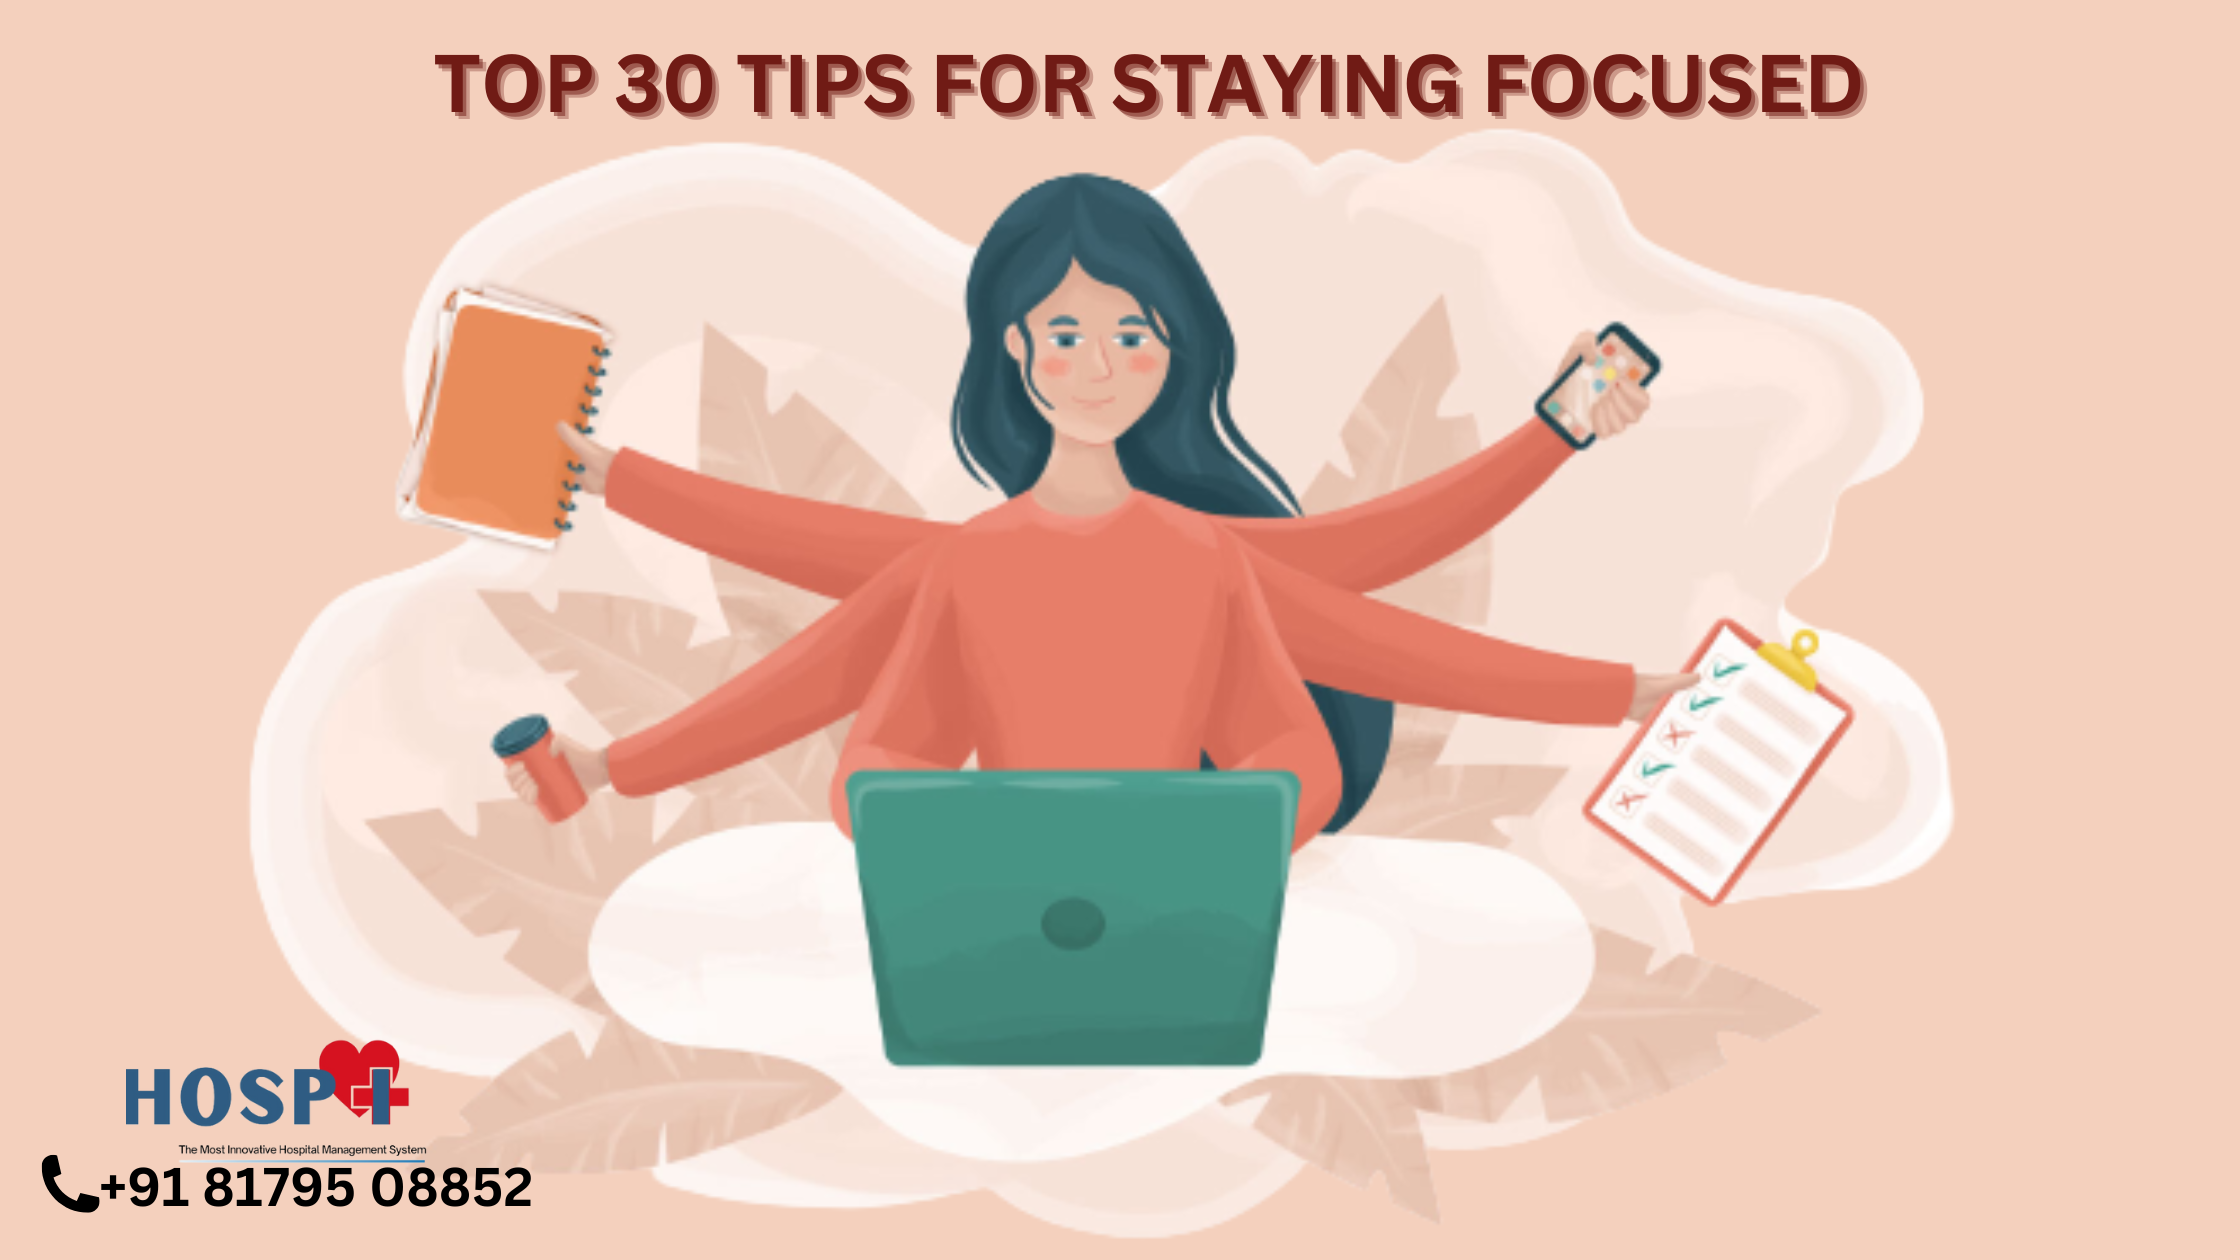 Top 30 Tips for Staying Focused